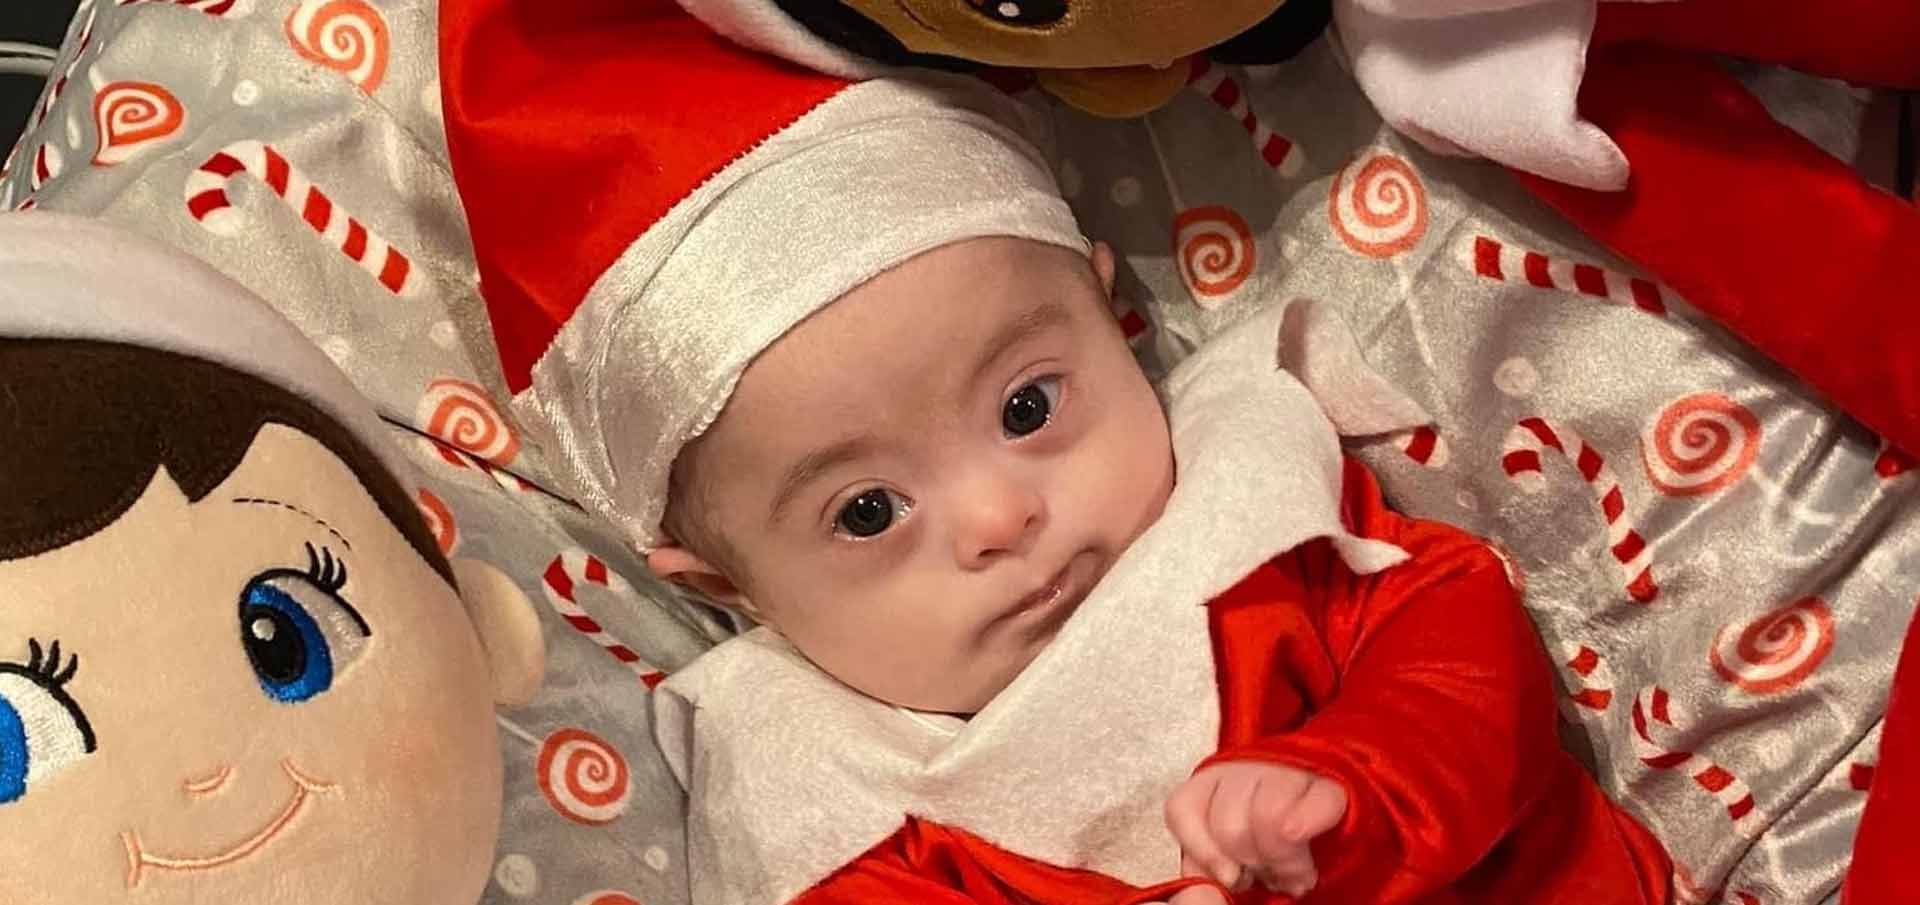 A baby in a Santa costume